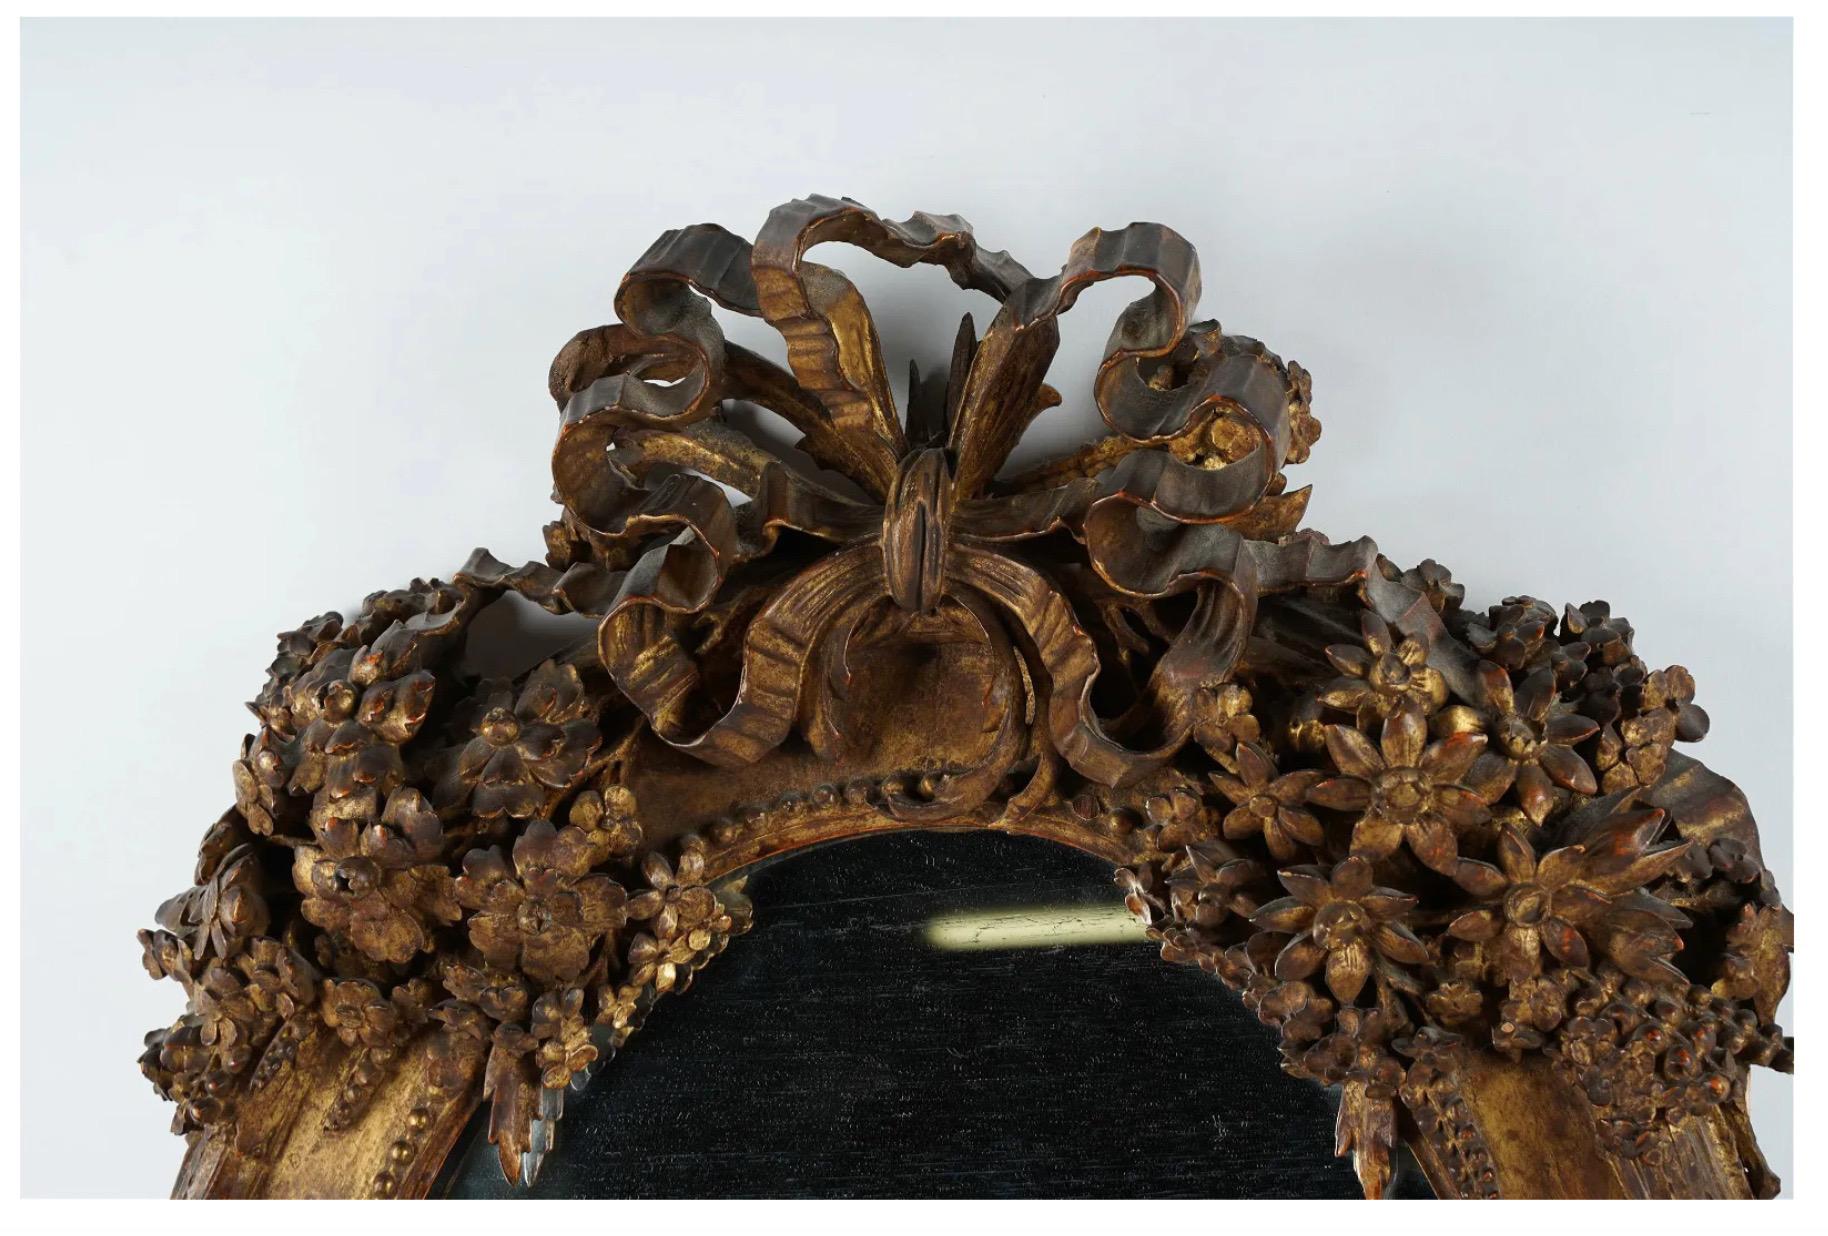 This is one of the most stunning and unique period Louis XVI mirrors we have seen. The depth and finely detailed floral carvings include sunflowers, lilies, daisies and roses. The bows at both the top and bottom of the mirror are elaborate and